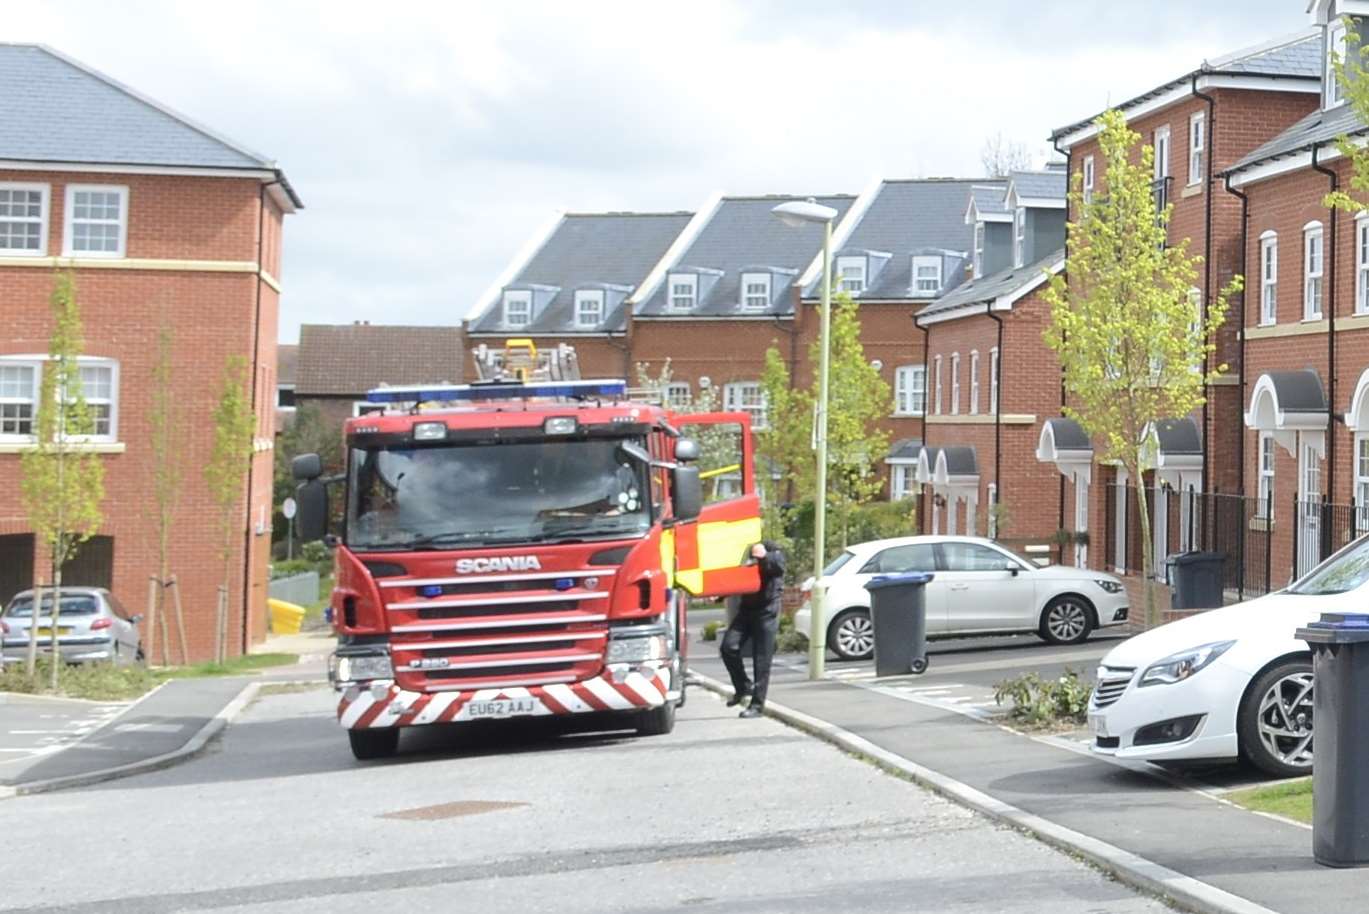 Fire crews were called to the home in Canterbury